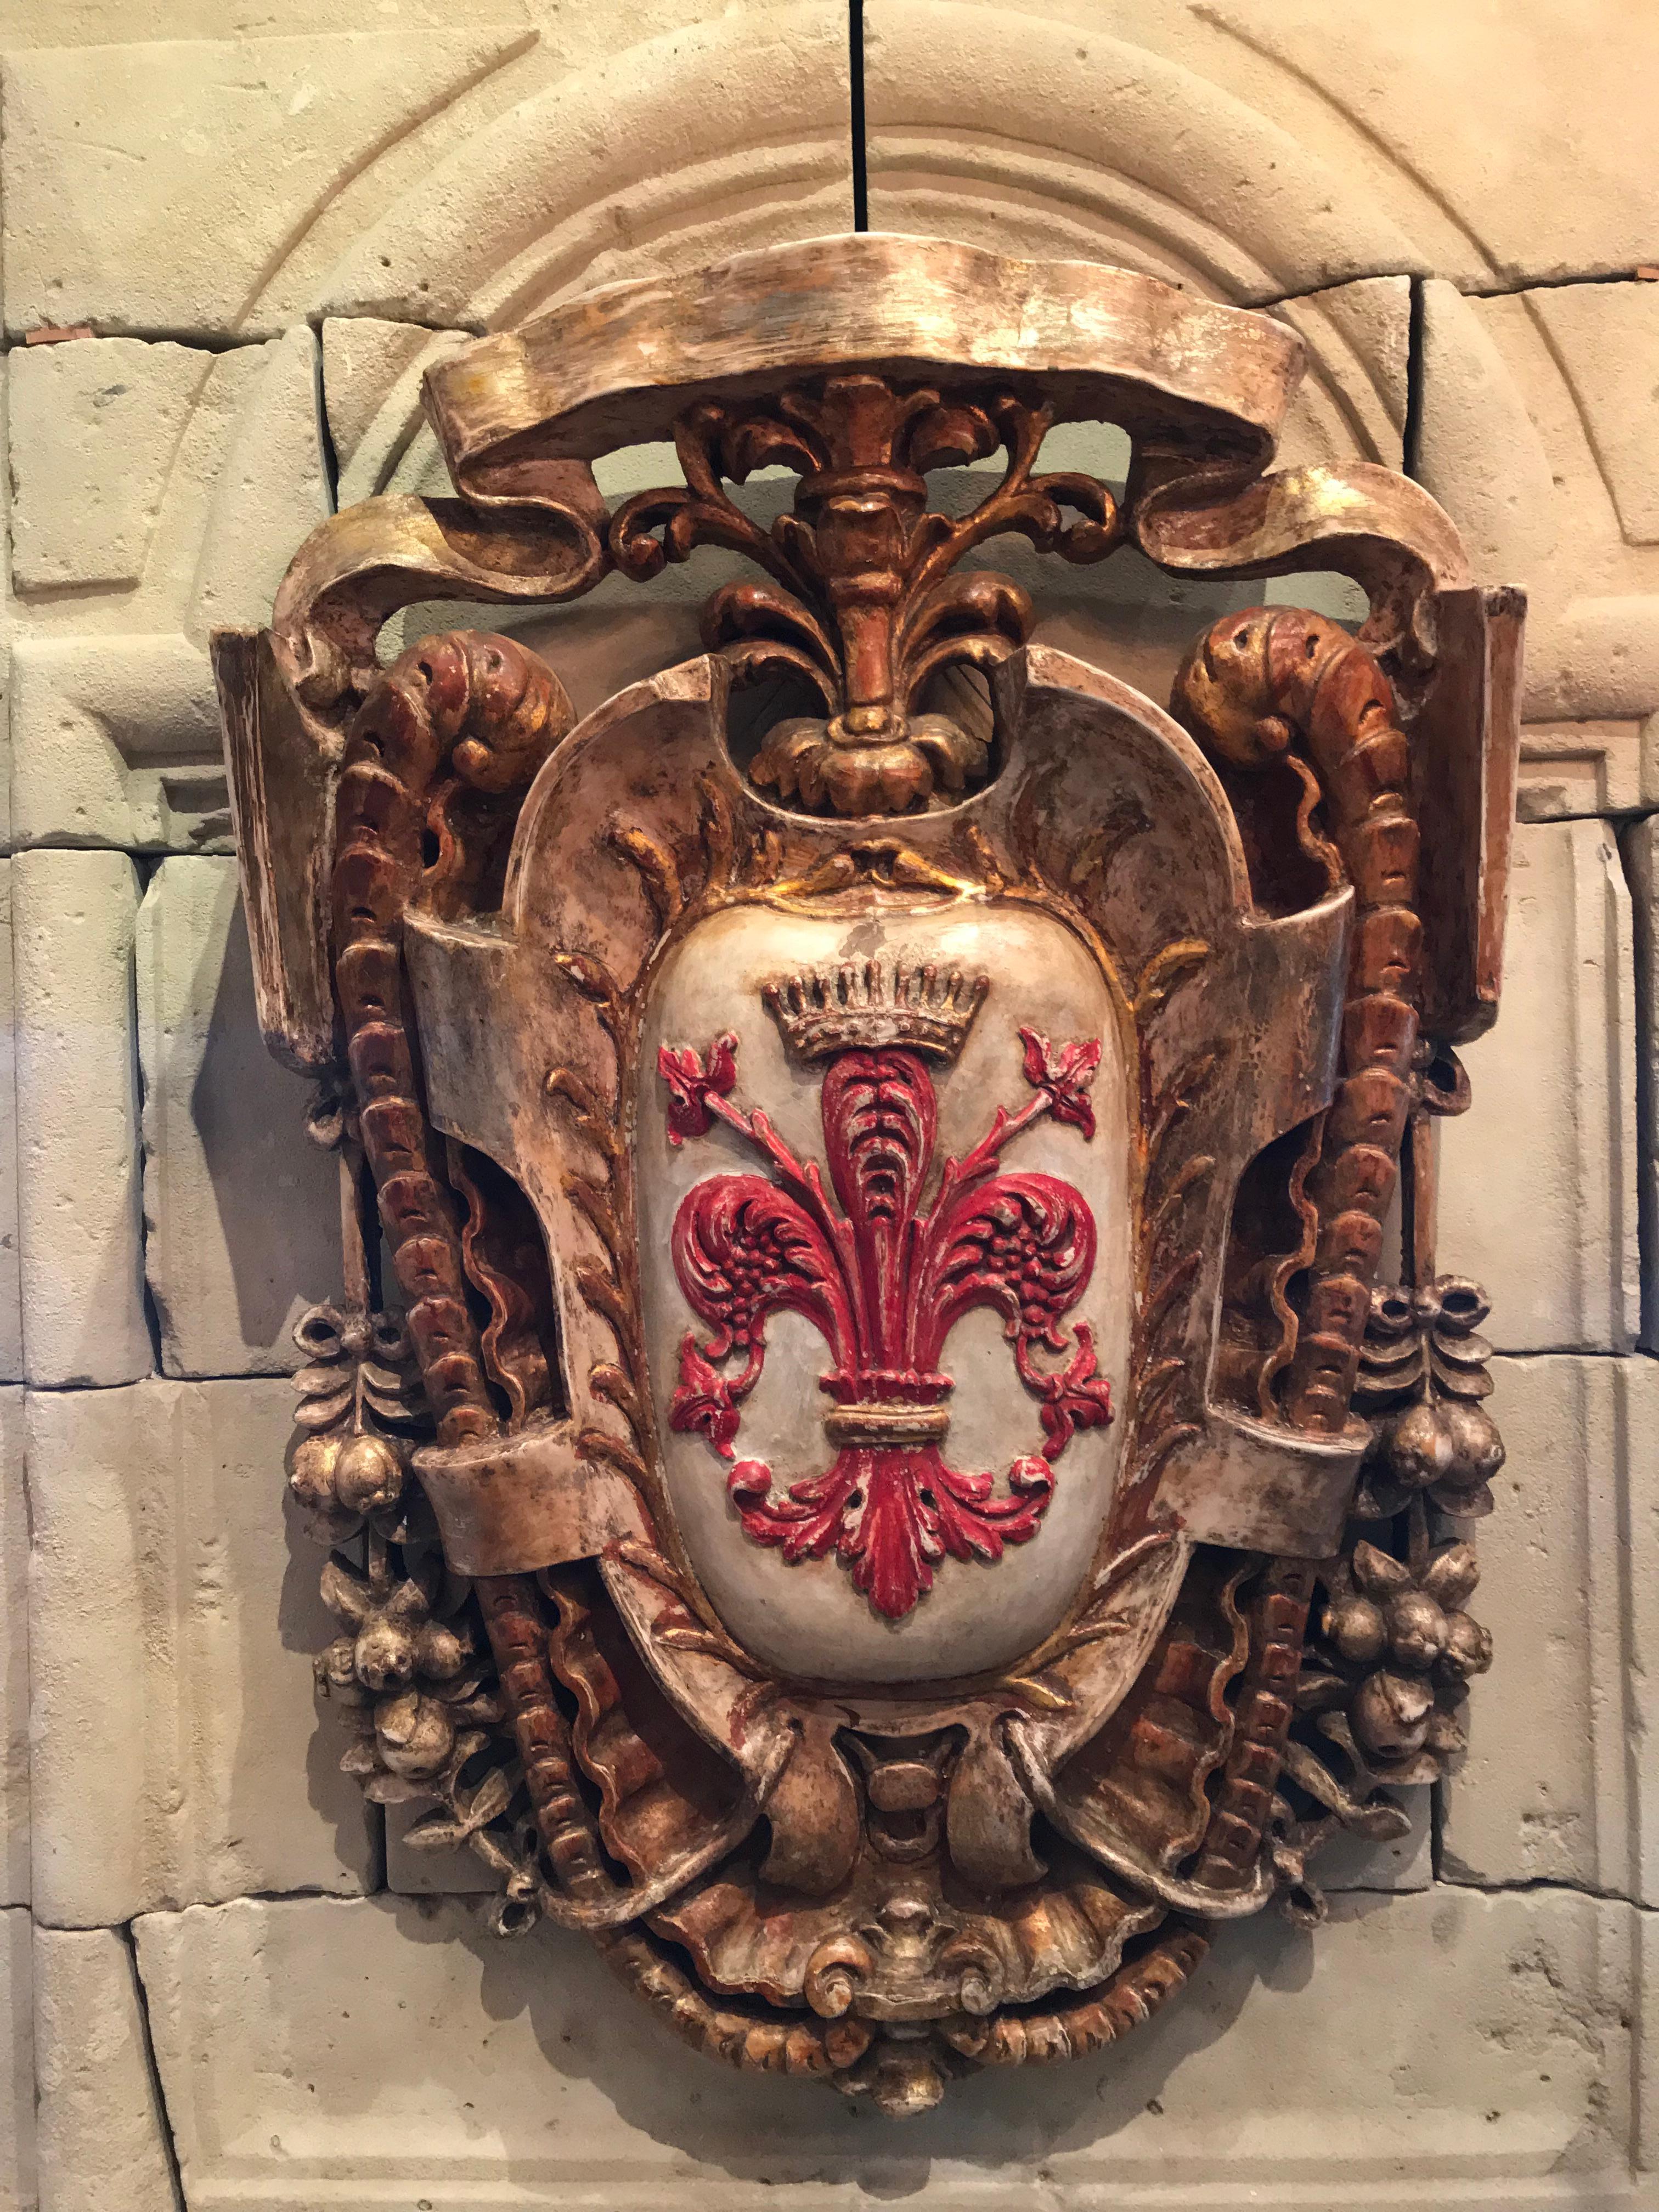 Beautiful 18th-19th century hand carved with scrolls fleur-de-lis (or fleur de lys) and topped with a crown as an emblem of indisputable sovereignty.
Great to use as a sculpture, architectural element above an exterior entrance a bedroom, entryway